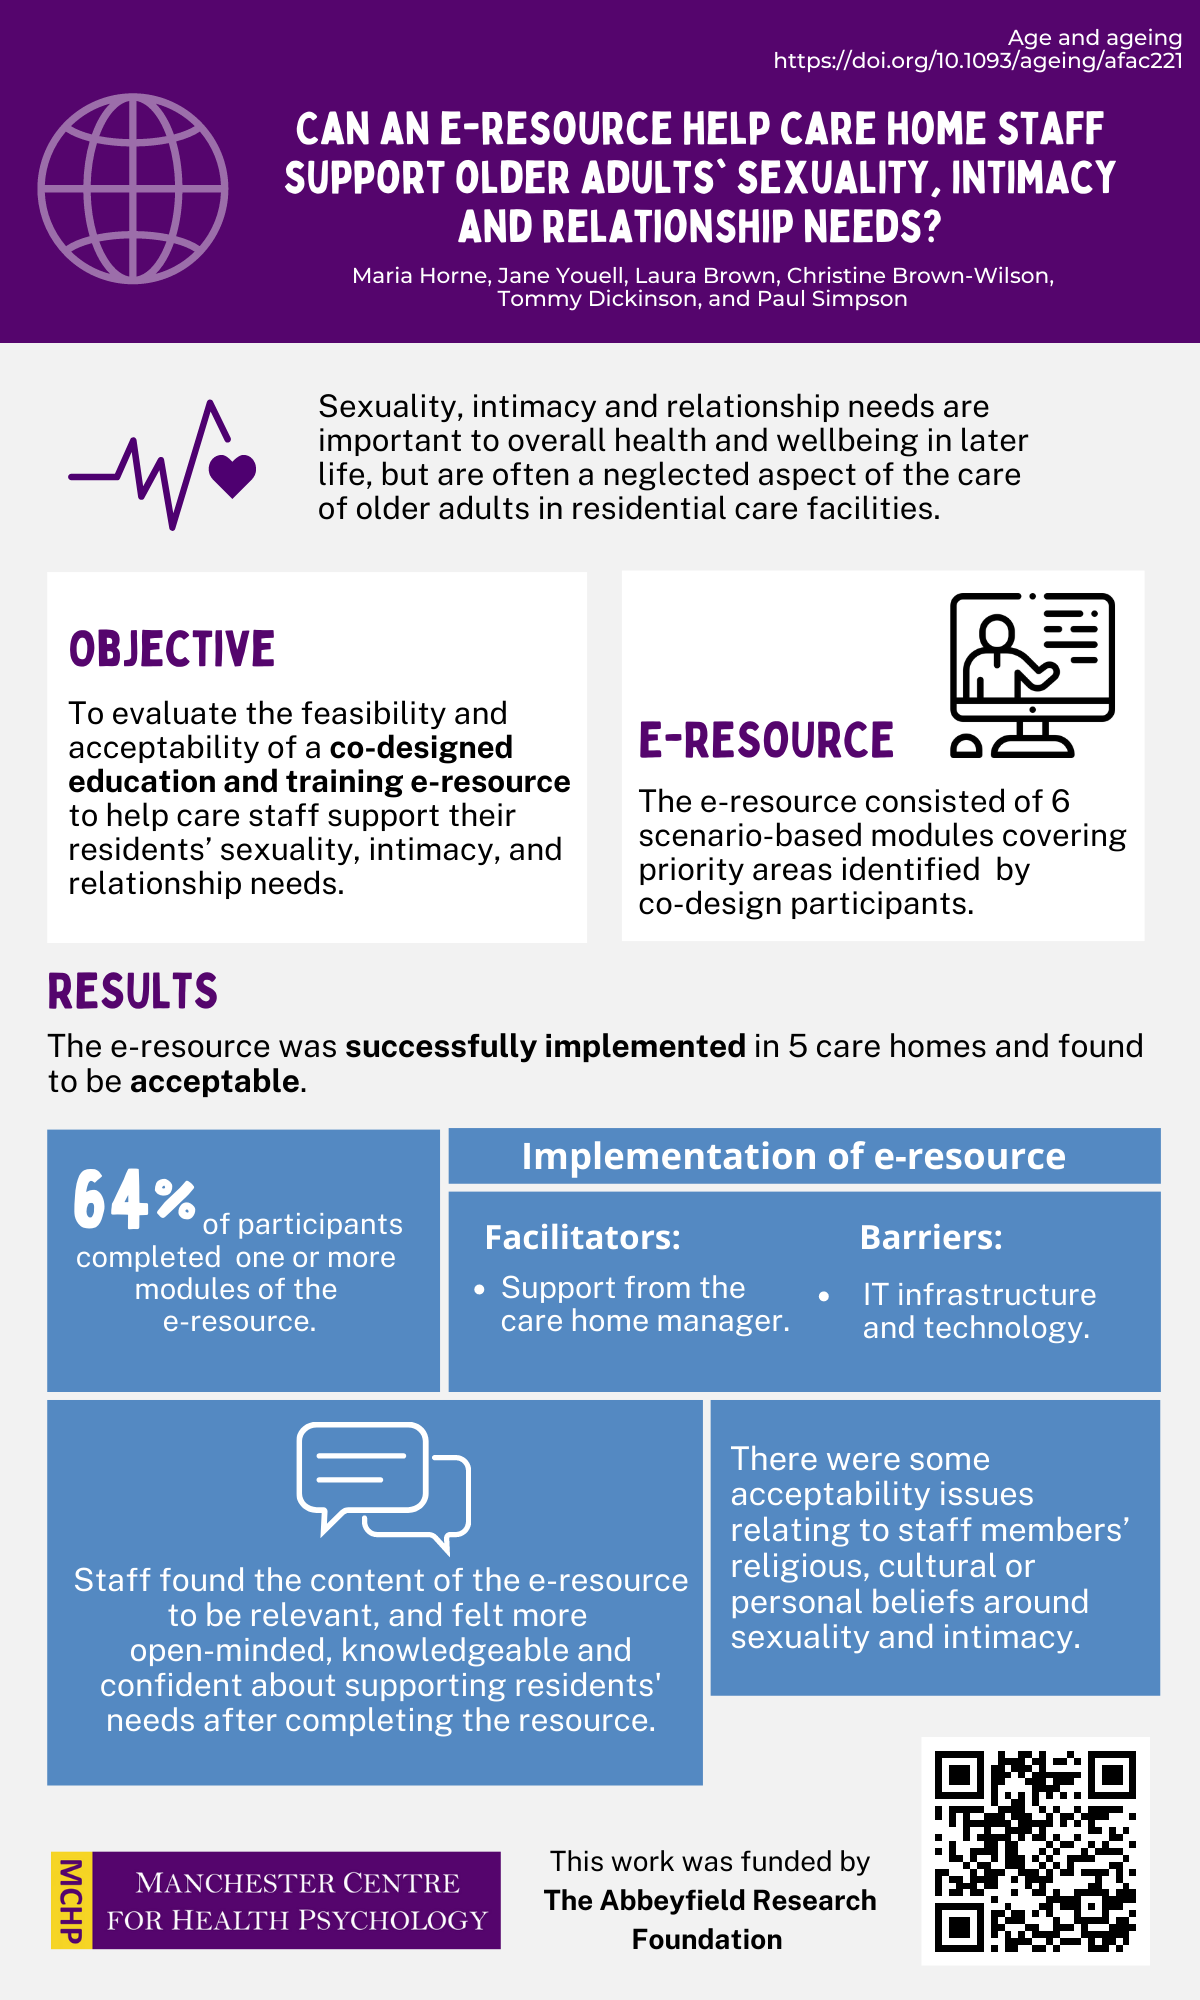 Infographic: Supporting the sexuality, intimacy and relationship needs of older care home residents.